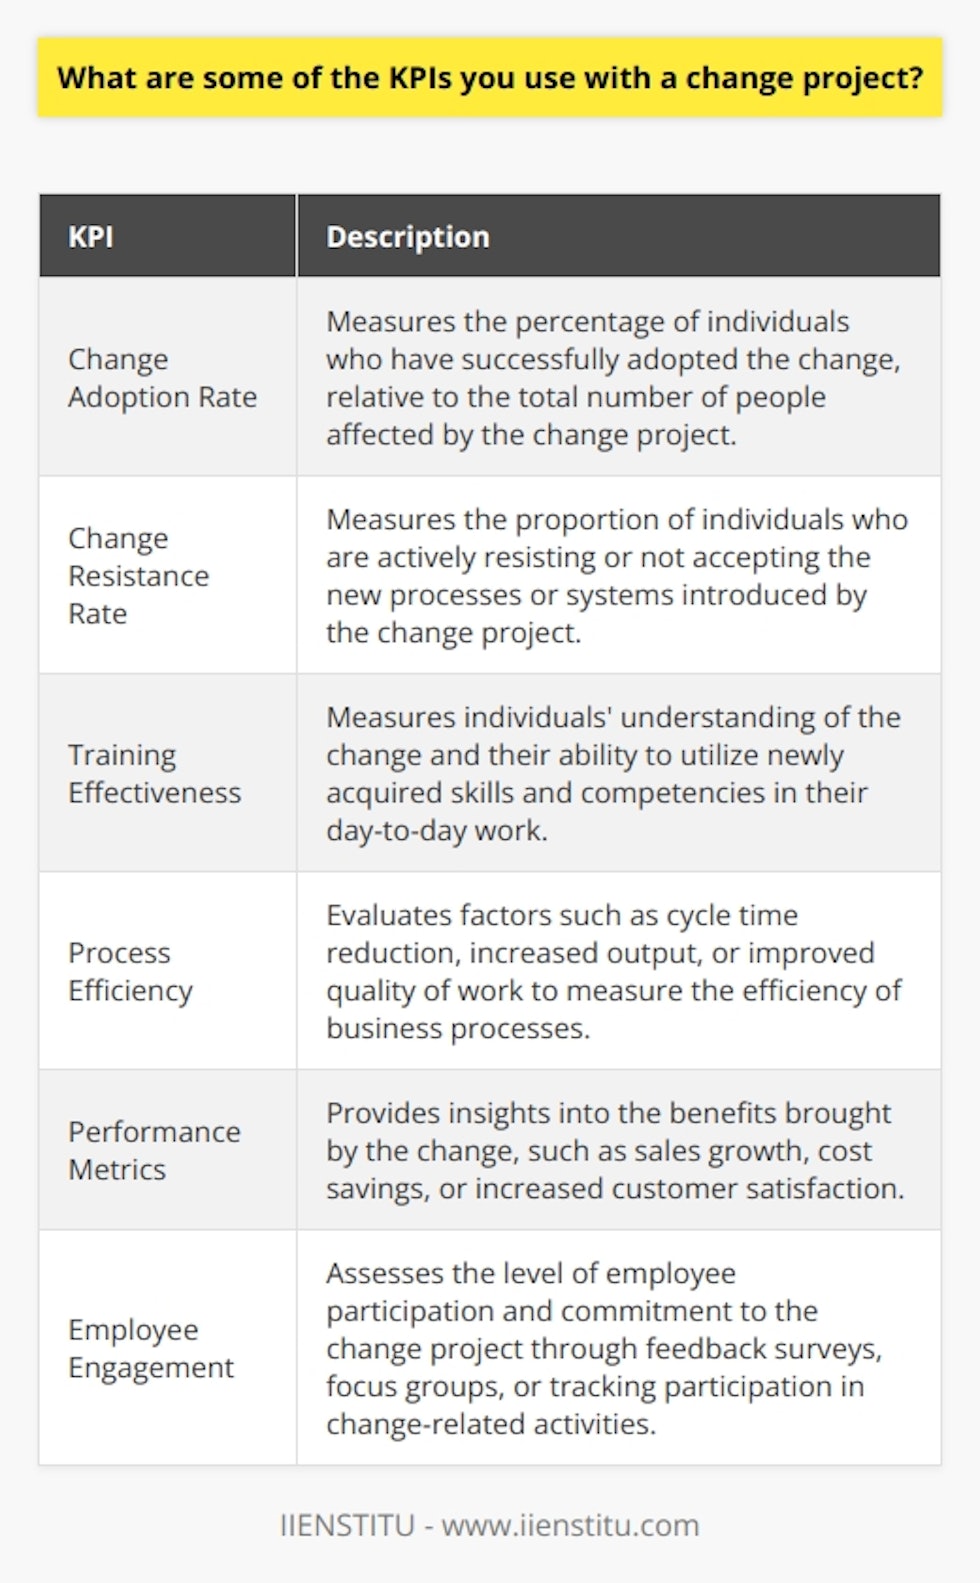 KPIs, or key performance indicators, play a crucial role in measuring the success of change management projects. These indicators provide valuable insights into the progress, effectiveness, and impact of implemented changes. By utilizing the right set of KPIs, project managers can ensure that the objectives of the change project are met and that the desired outcomes are achieved. In this article, we will discuss some of the KPIs commonly used with change projects.The first KPI is the Change Adoption Rate. This metric measures the percentage of individuals who have successfully adopted the change, relative to the total number of people affected by the change project. A high change adoption rate indicates that the change has been well-received and accepted by stakeholders. It confirms the effectiveness of the change management strategy and demonstrates that the desired changes have been embraced.On the other hand, the Change Resistance Rate measures the proportion of individuals who are actively resisting or not accepting the new processes or systems introduced by the change project. This KPI helps project managers assess the level of resistance and negativity towards the change. By identifying potential issues and challenges, project managers can take necessary actions to address resistance and ensure the smooth implementation of the change.Another important KPI is Training Effectiveness. Change management often involves providing training and increasing the capabilities and knowledge of stakeholders. This KPI measures individuals' understanding of the change and their ability to utilize newly acquired skills and competencies in their day-to-day work. Training effectiveness is typically measured through evaluations, tests, or surveys conducted before and after training sessions. This KPI allows project managers to evaluate the effectiveness of training programs and make necessary adjustments to ensure maximum impact.In change projects that target improvements in business processes or performance, Process Efficiency and Performance Metrics are essential KPIs to consider. Process efficiency is evaluated by assessing factors such as cycle time reduction, increased output, or improved quality of work. Performance metrics provide insights into the benefits brought by the change, such as sales growth, cost savings, or increased customer satisfaction. Monitoring these KPIs enables project managers to track the progress of process improvements and evaluate the overall impact of the change on the organization's performance.Lastly, Employee Engagement is a critical KPI that correlates with the success of change initiatives. Engaged employees are more likely to support and actively participate in change projects. Employee engagement can be assessed through feedback surveys, focus groups, or by tracking the level of participation in change-related activities, such as workshops or brainstorming sessions. High levels of employee engagement indicate a commitment to the change project and increase the likelihood of its success.To sum up, the effective use of KPIs is vital for the success and sustainability of change management projects. By monitoring indicators such as Change Adoption Rate, Change Resistance Rate, Training Effectiveness, Process Efficiency, Performance Metrics, and Employee Engagement, project managers can gain valuable insights into the progress and impact of change initiatives. These insights can inform decision-making and enable project managers to address potential issues or challenges promptly.